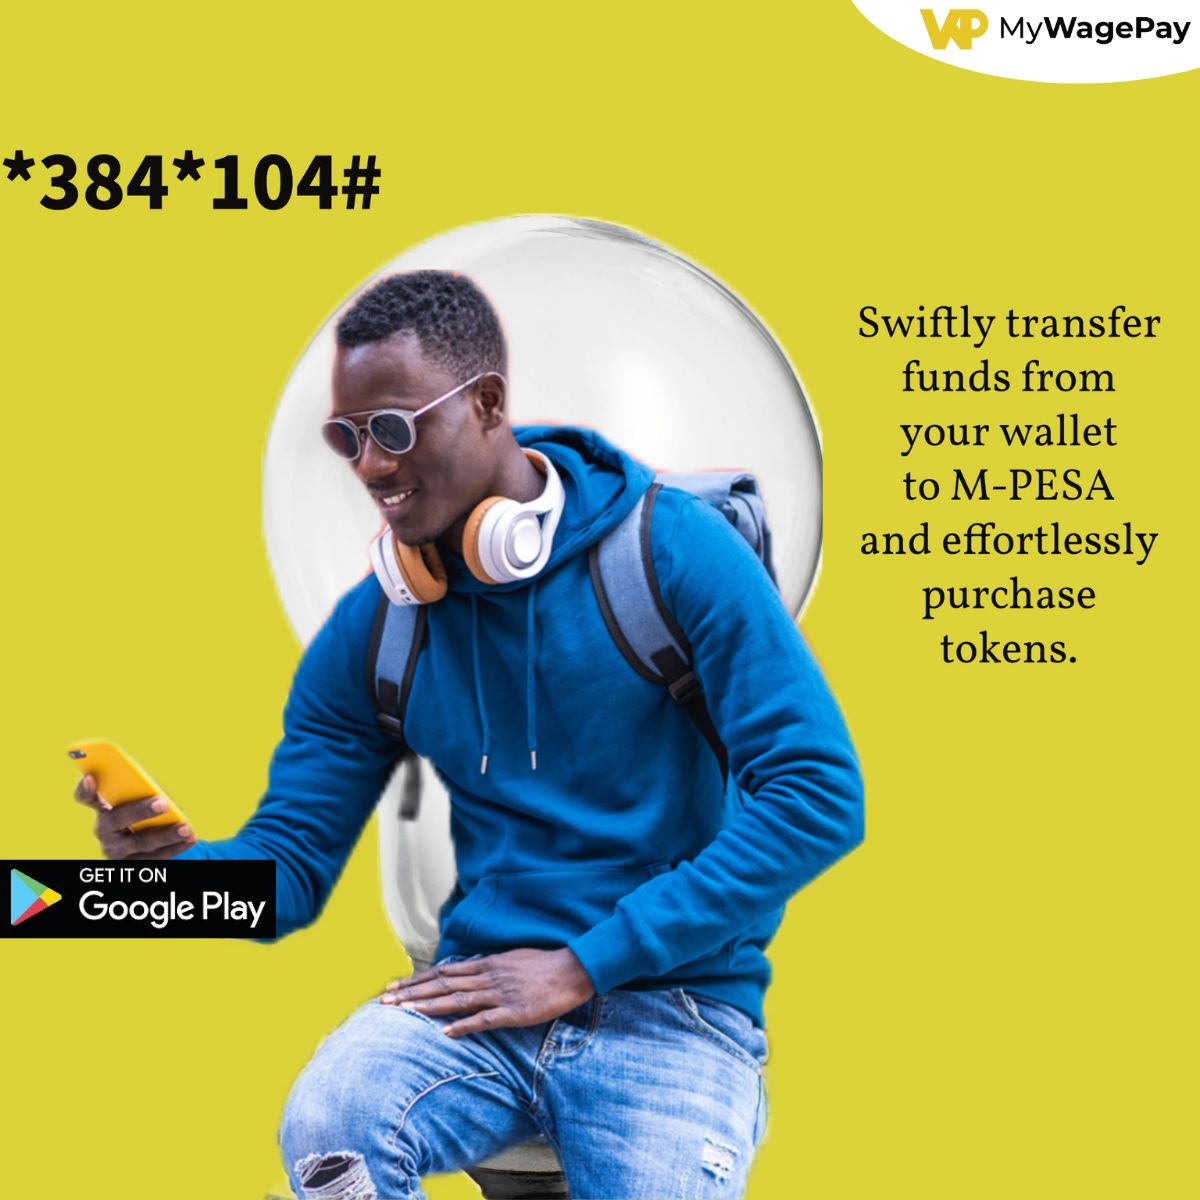 Acquire tokens in a breeze by seamlessly moving funds from your wallet to M-PESA by dialing *384*104#.
#effortlesstransactions #tokens #Mywagepay